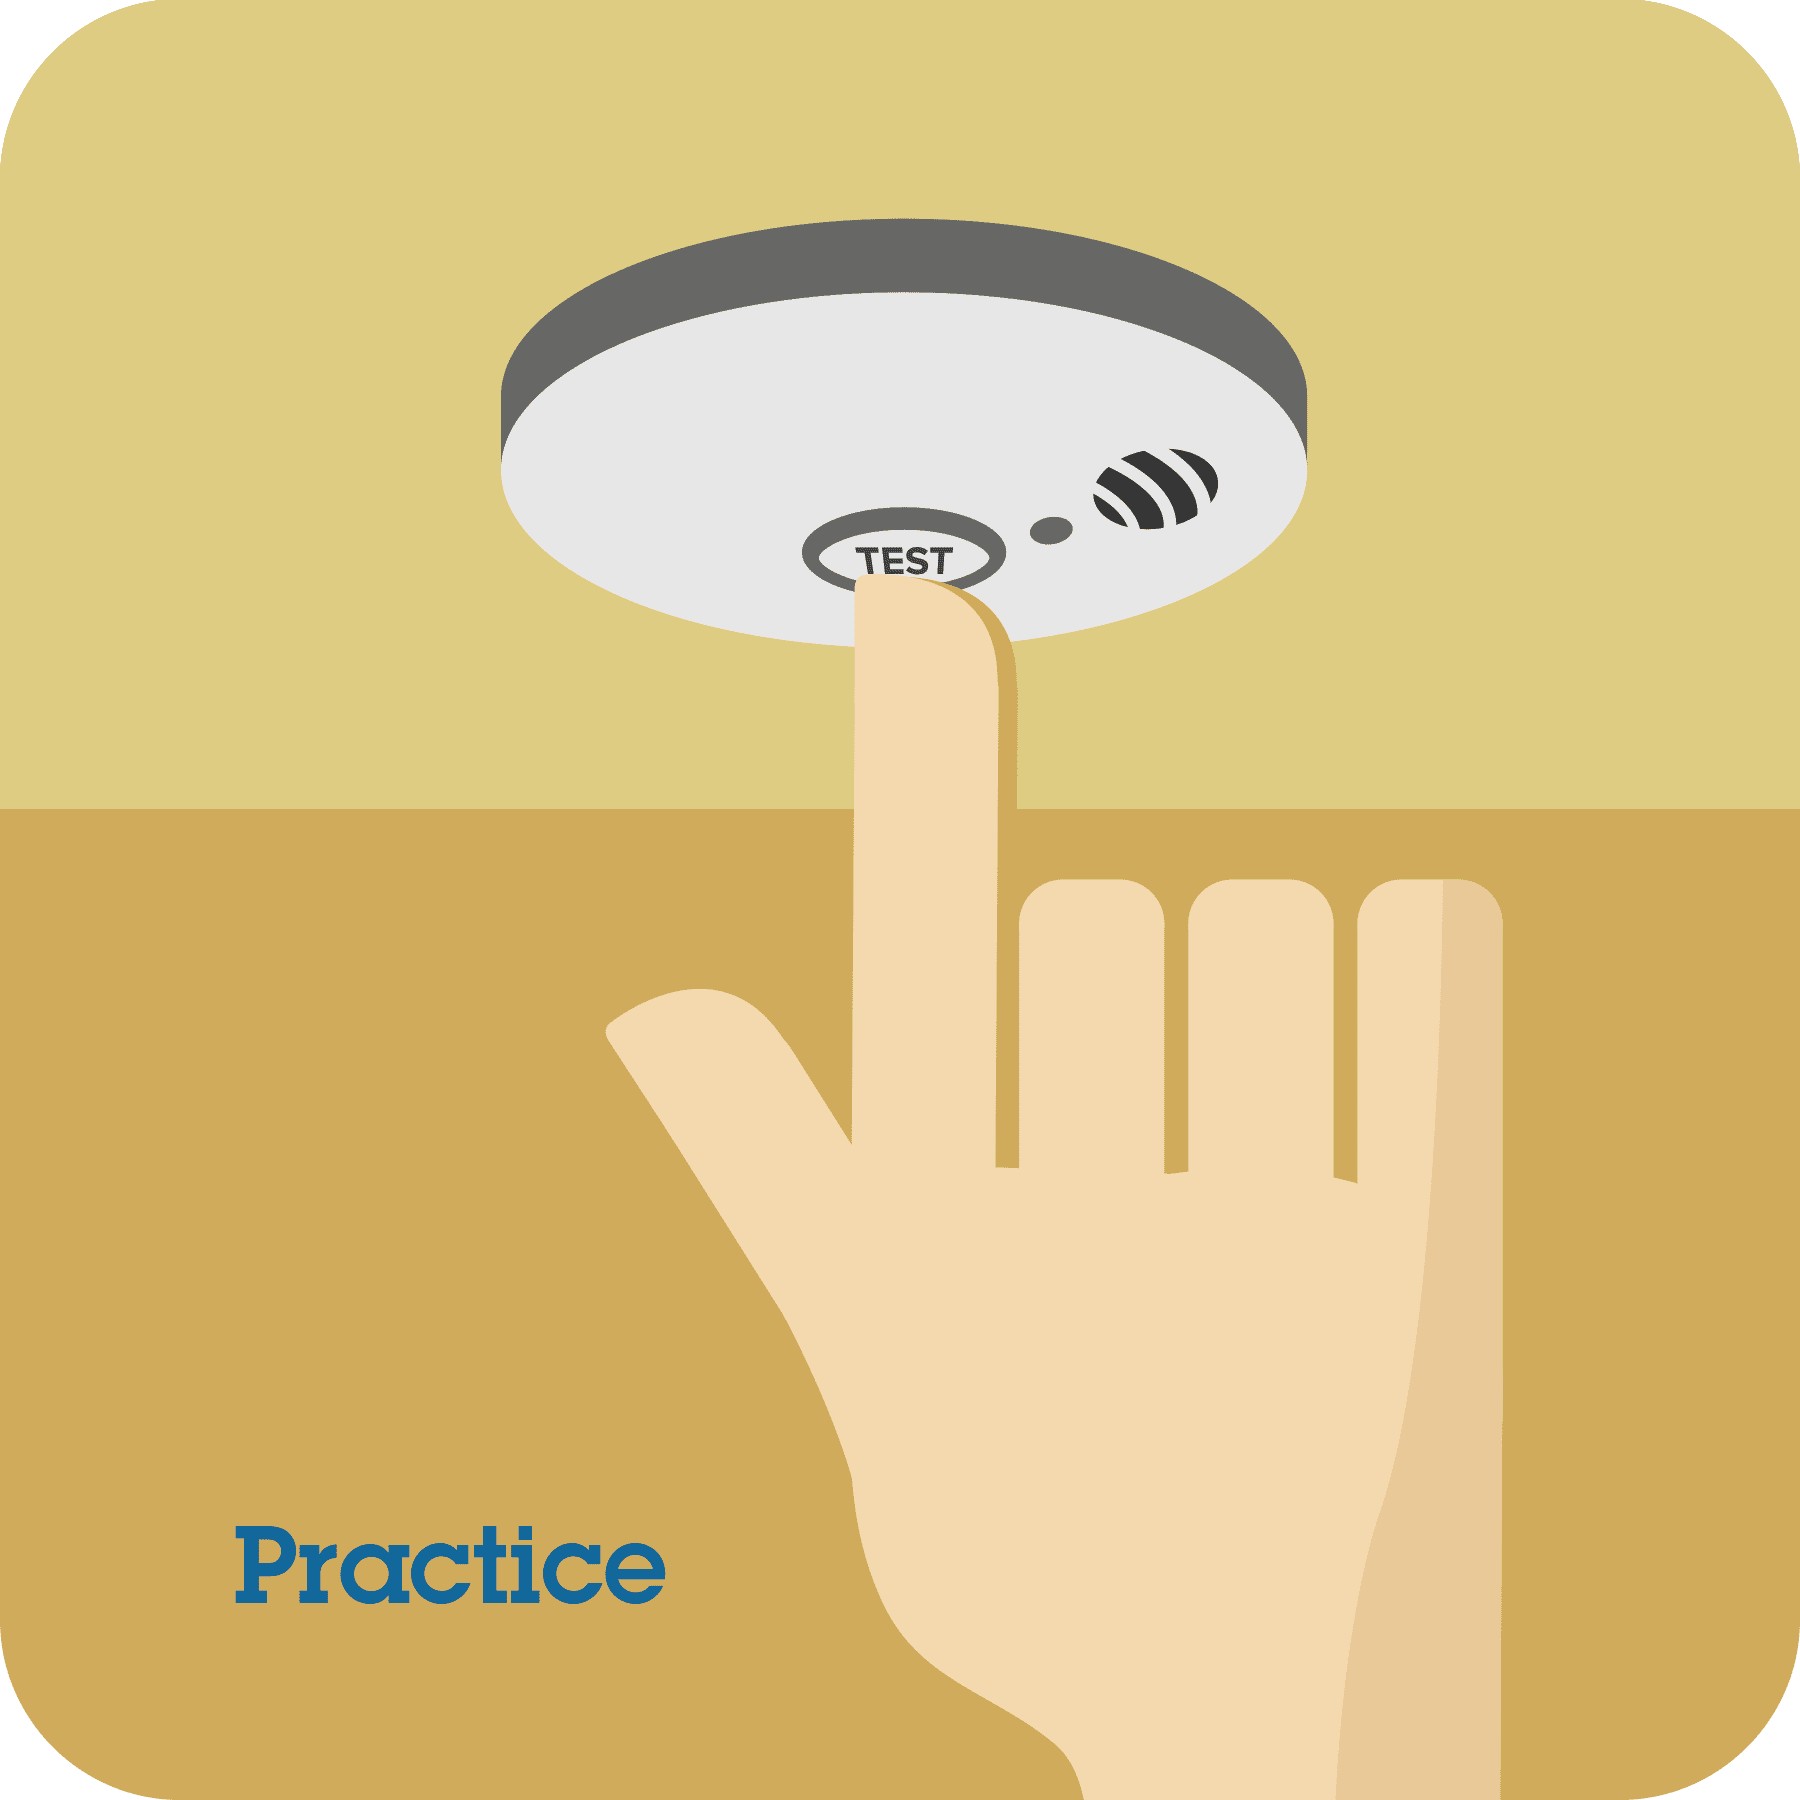 Hand pushes the test button on the alarm with practice prompt.